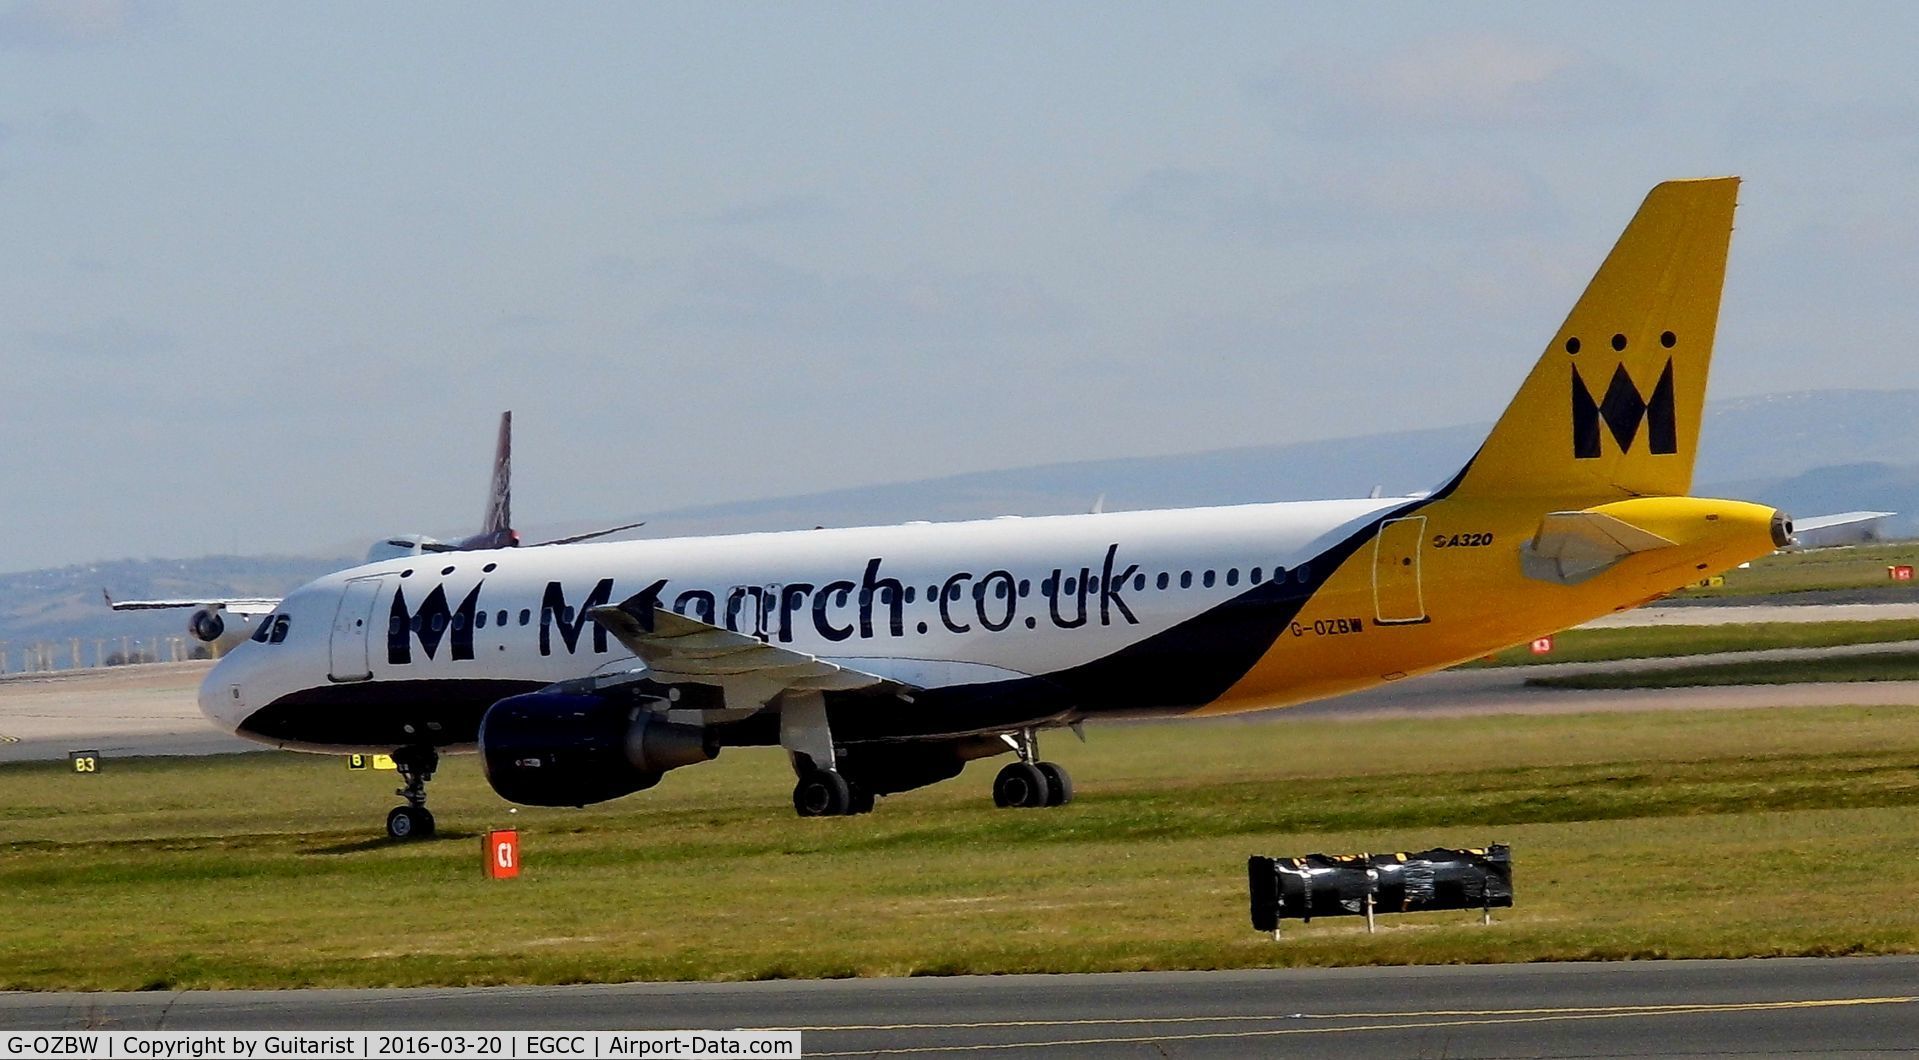 G-OZBW, 2001 Airbus A320-214 C/N 1571, At Manchester